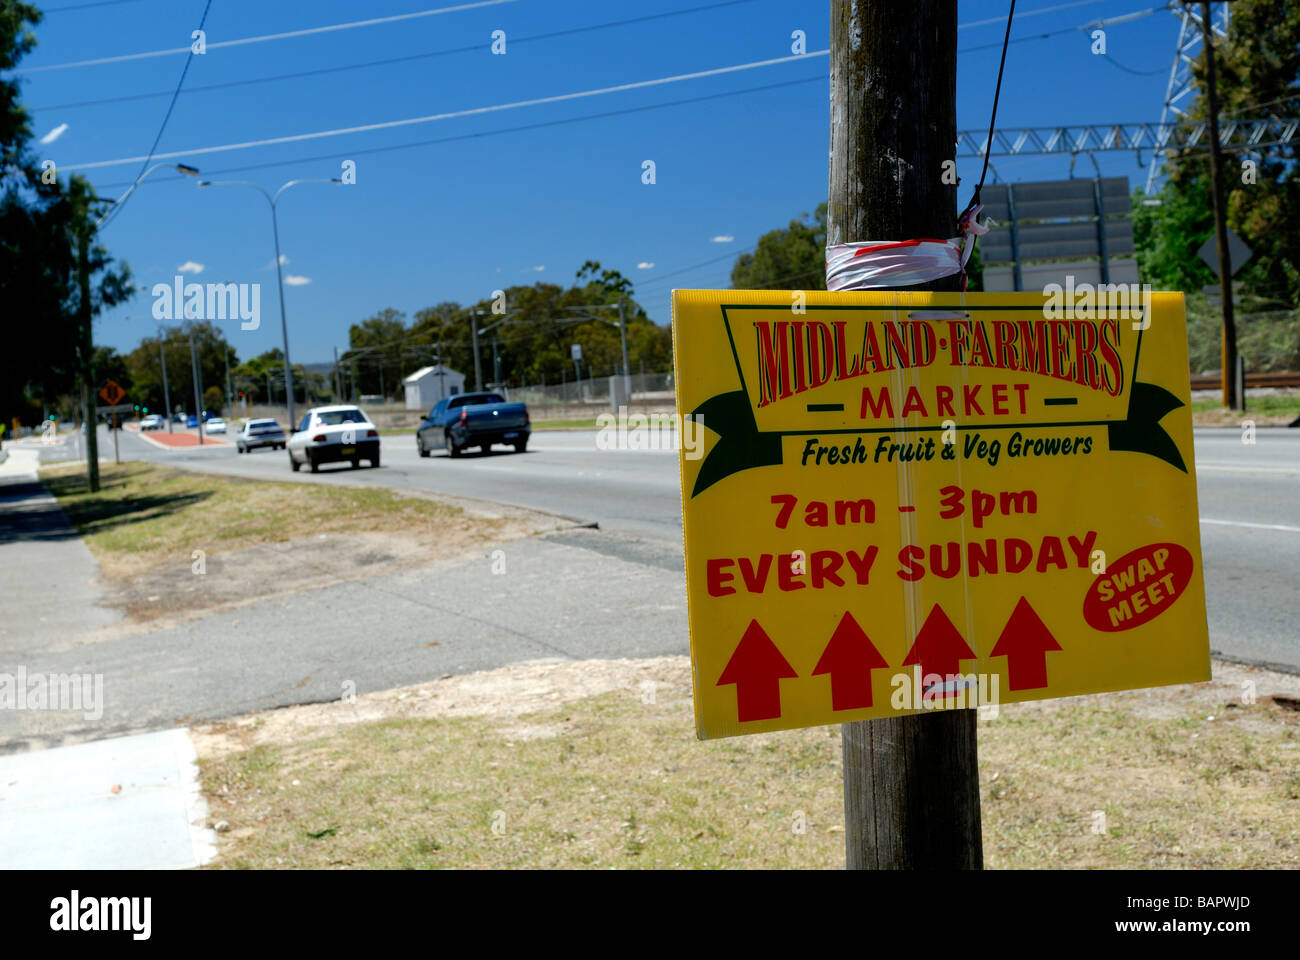 Roadside sign for the weekly Midland Growers Market, Midland, Perth, Western Australia Stock Photo